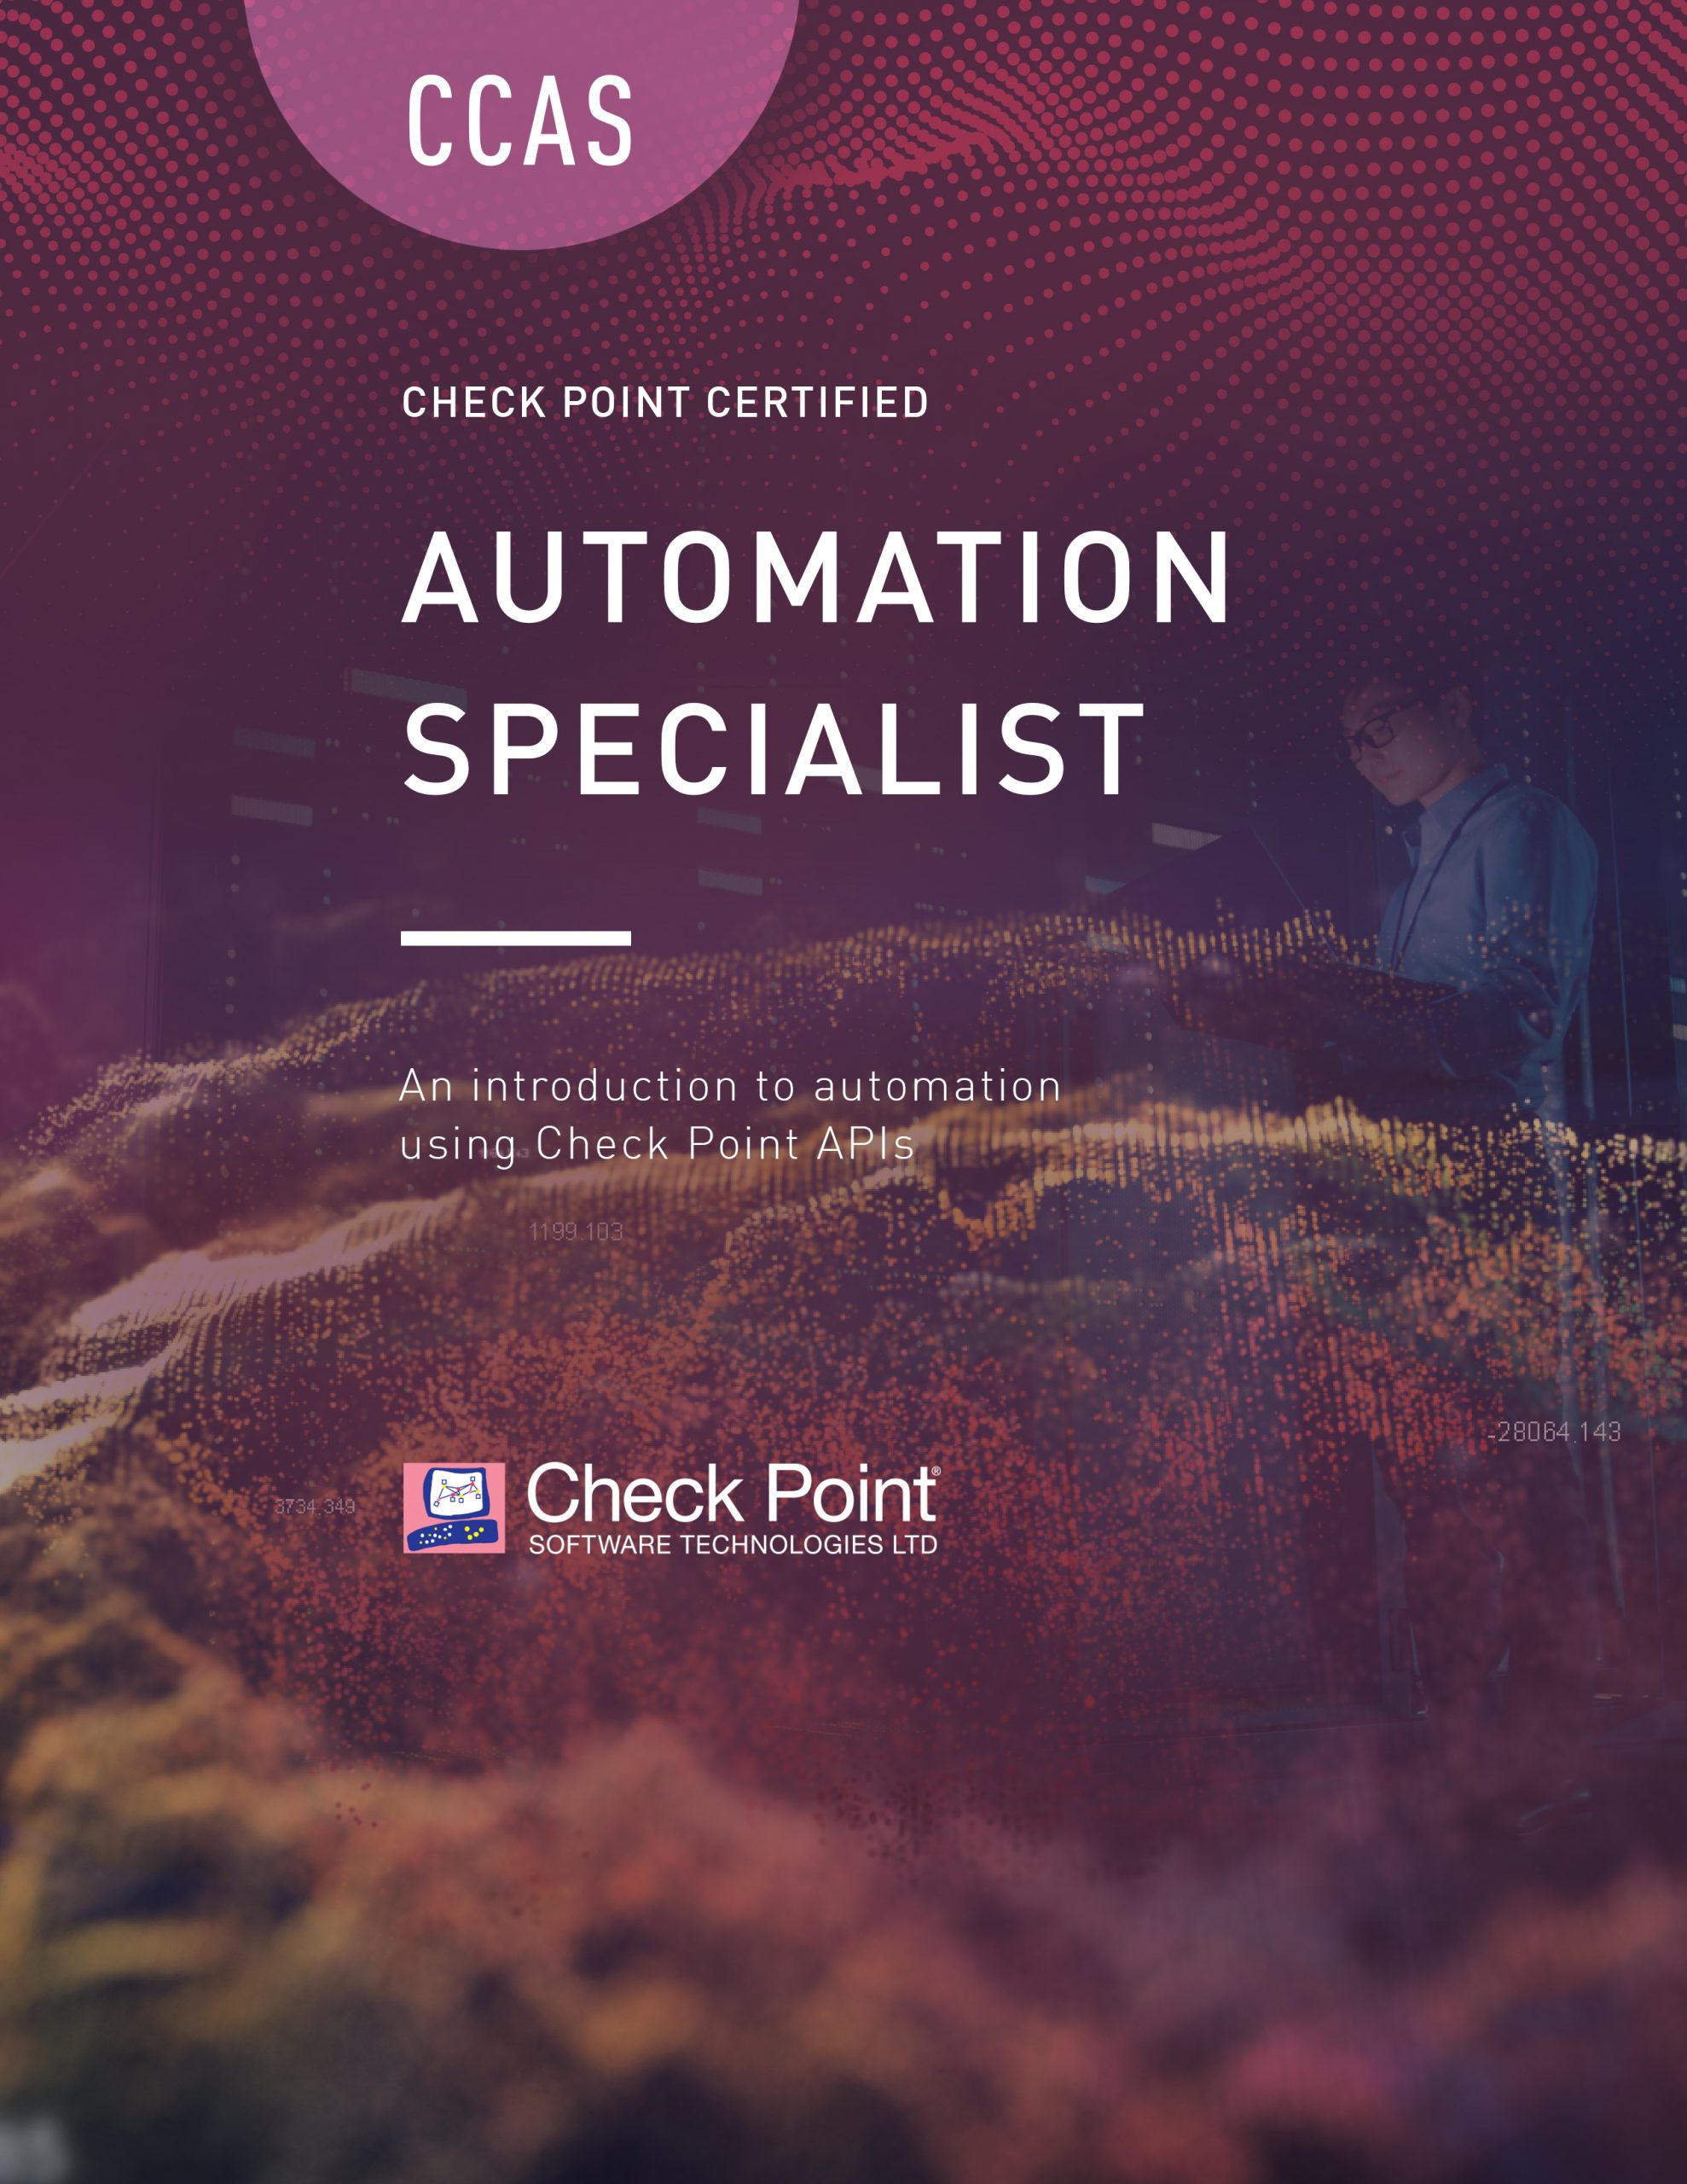 CCAS – Check Point Automation Specialist (CCAS)